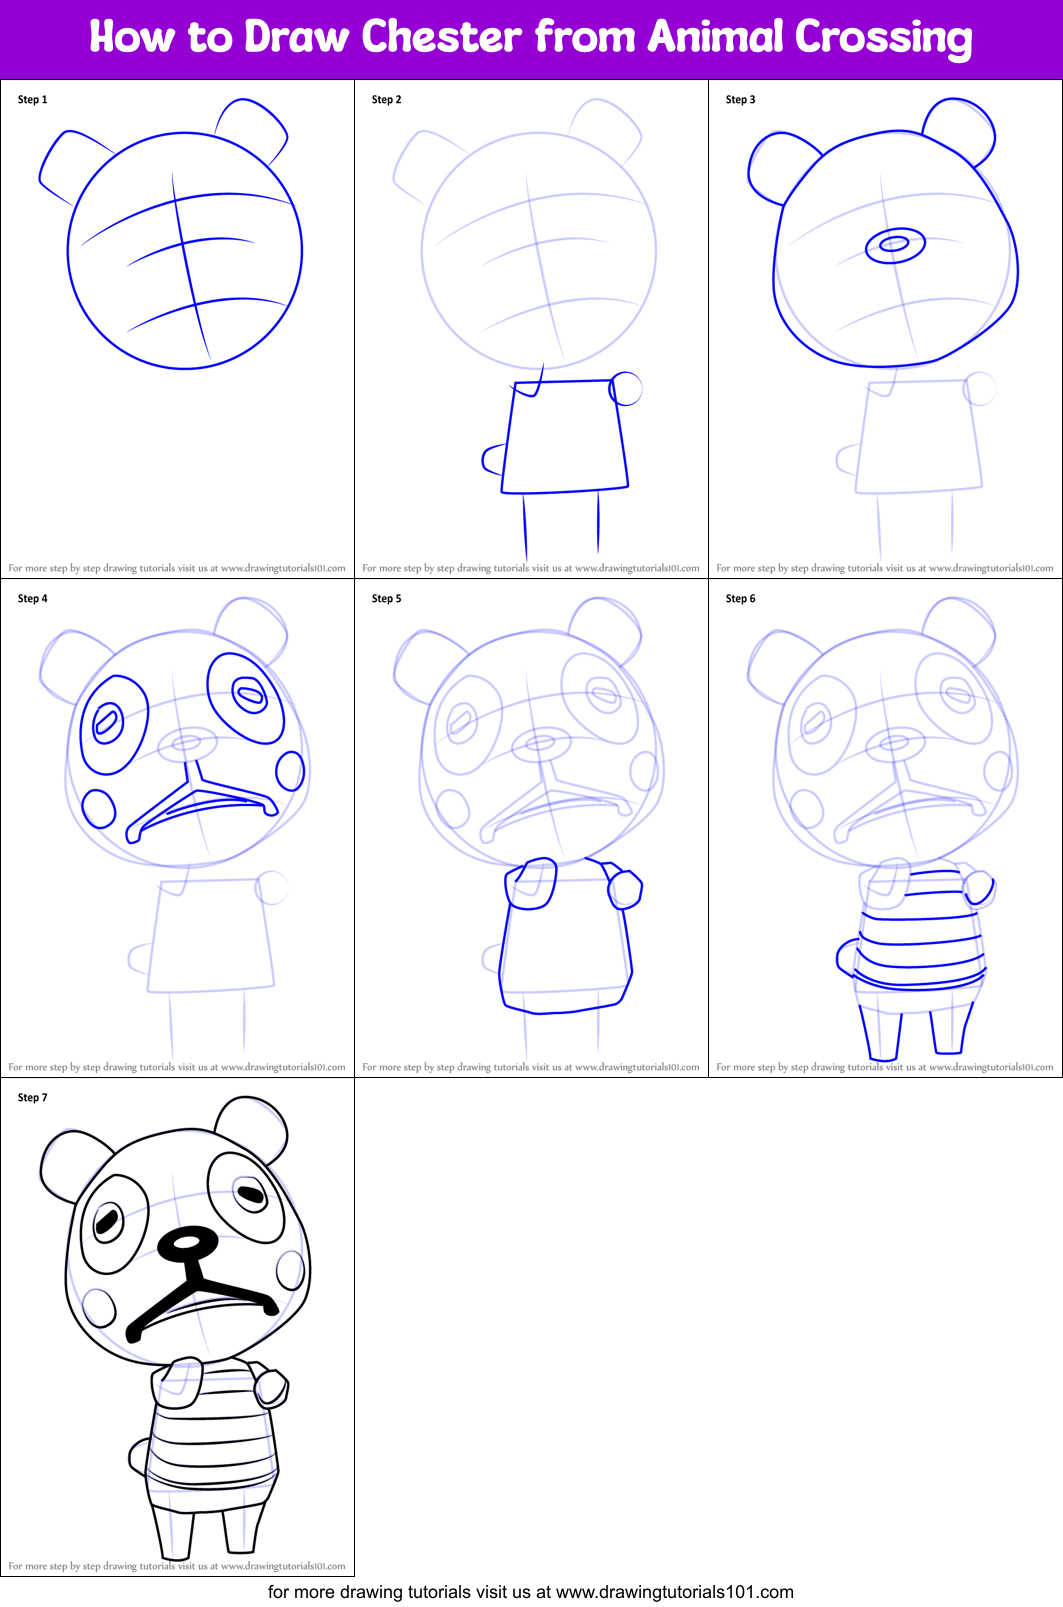 How to Draw Chester from Animal Crossing printable step by step drawing